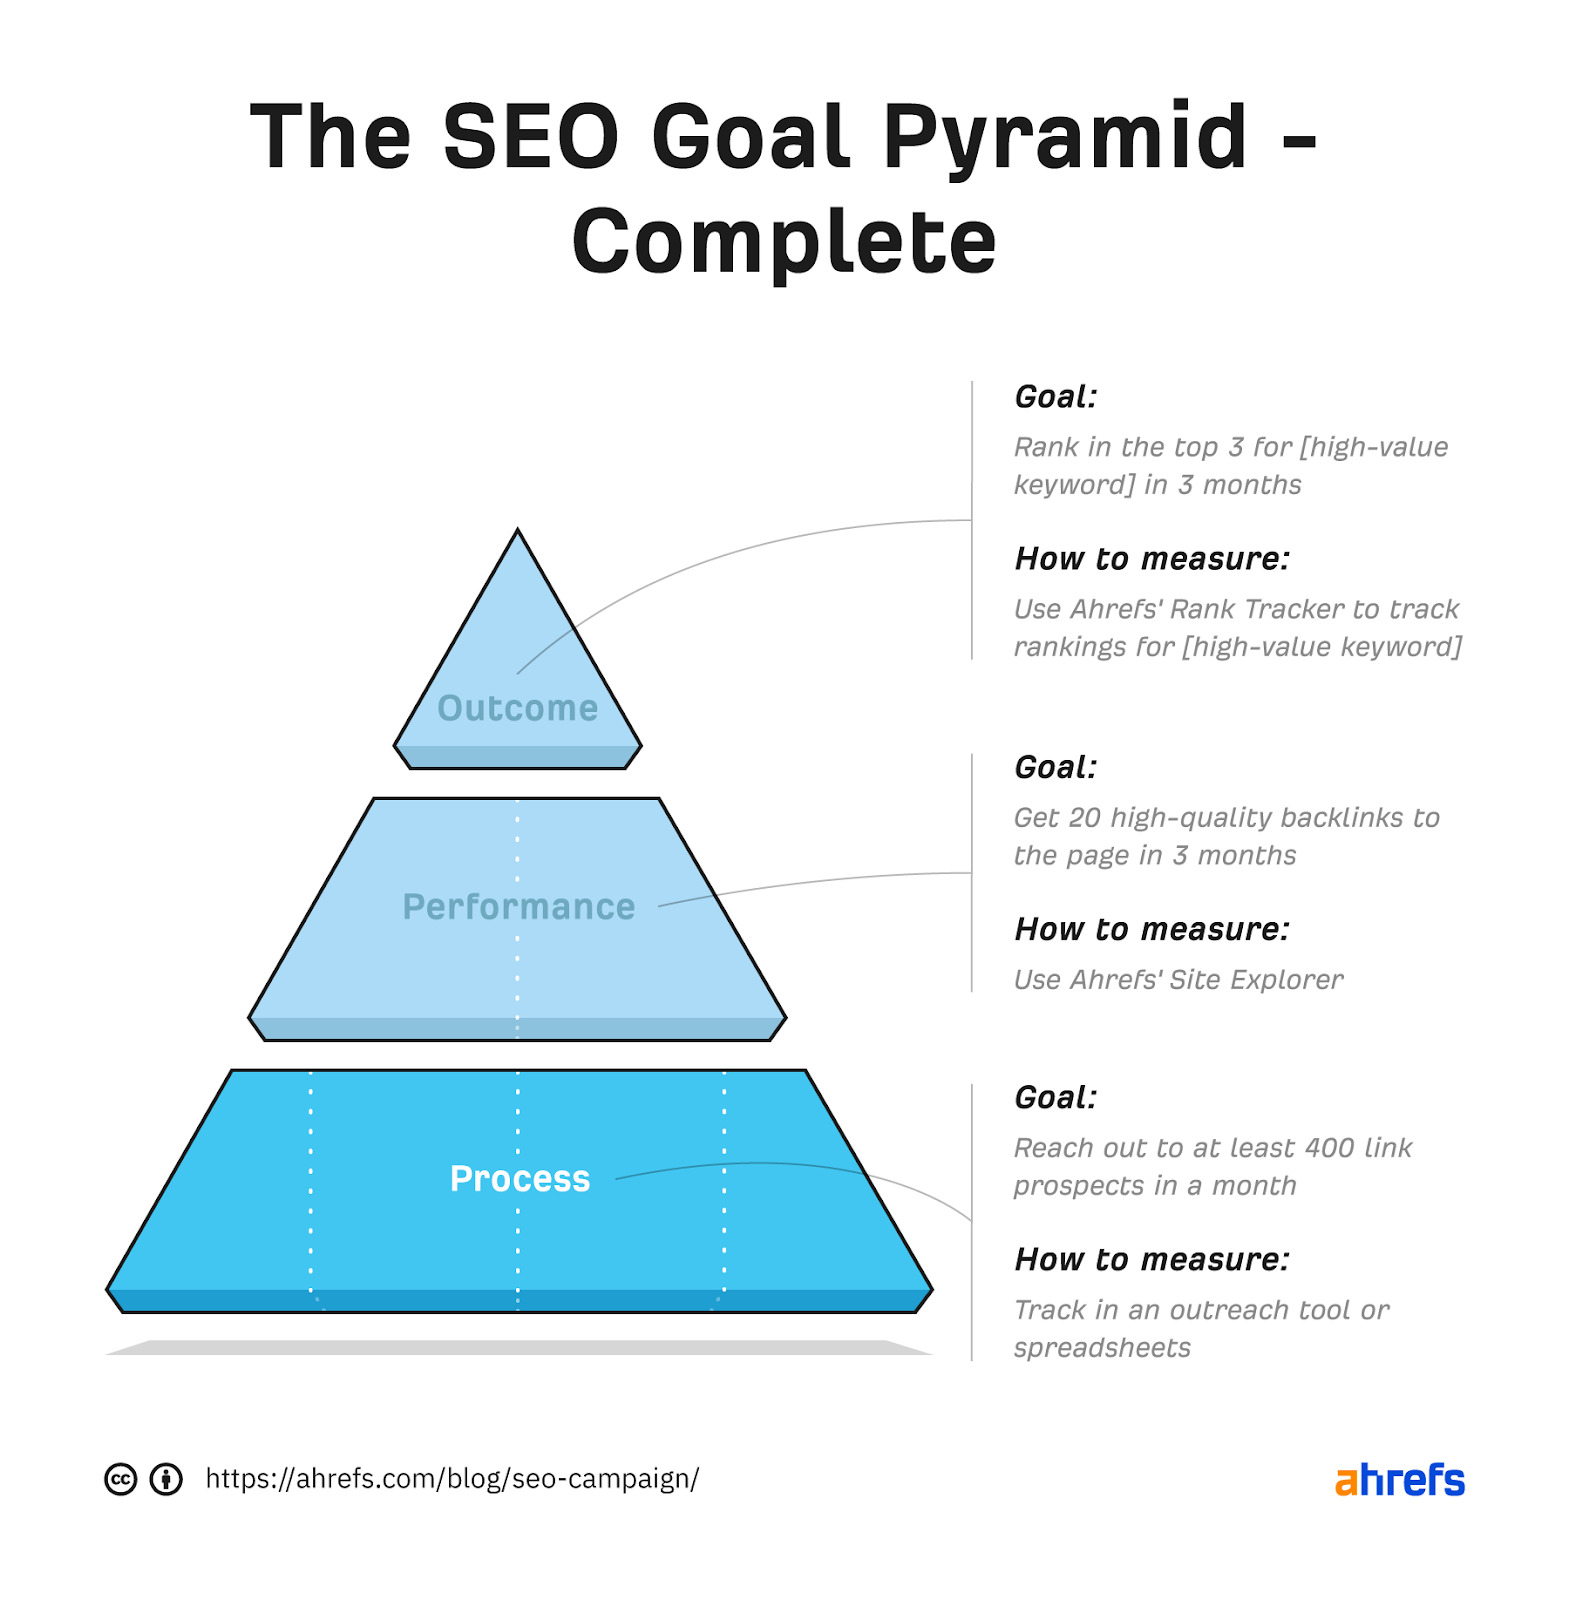 SEO goal pyramid divided into 3 sections (from top to bottom): outcome, performance, process. Each section now has short writeup about the goal and how to measure said goal